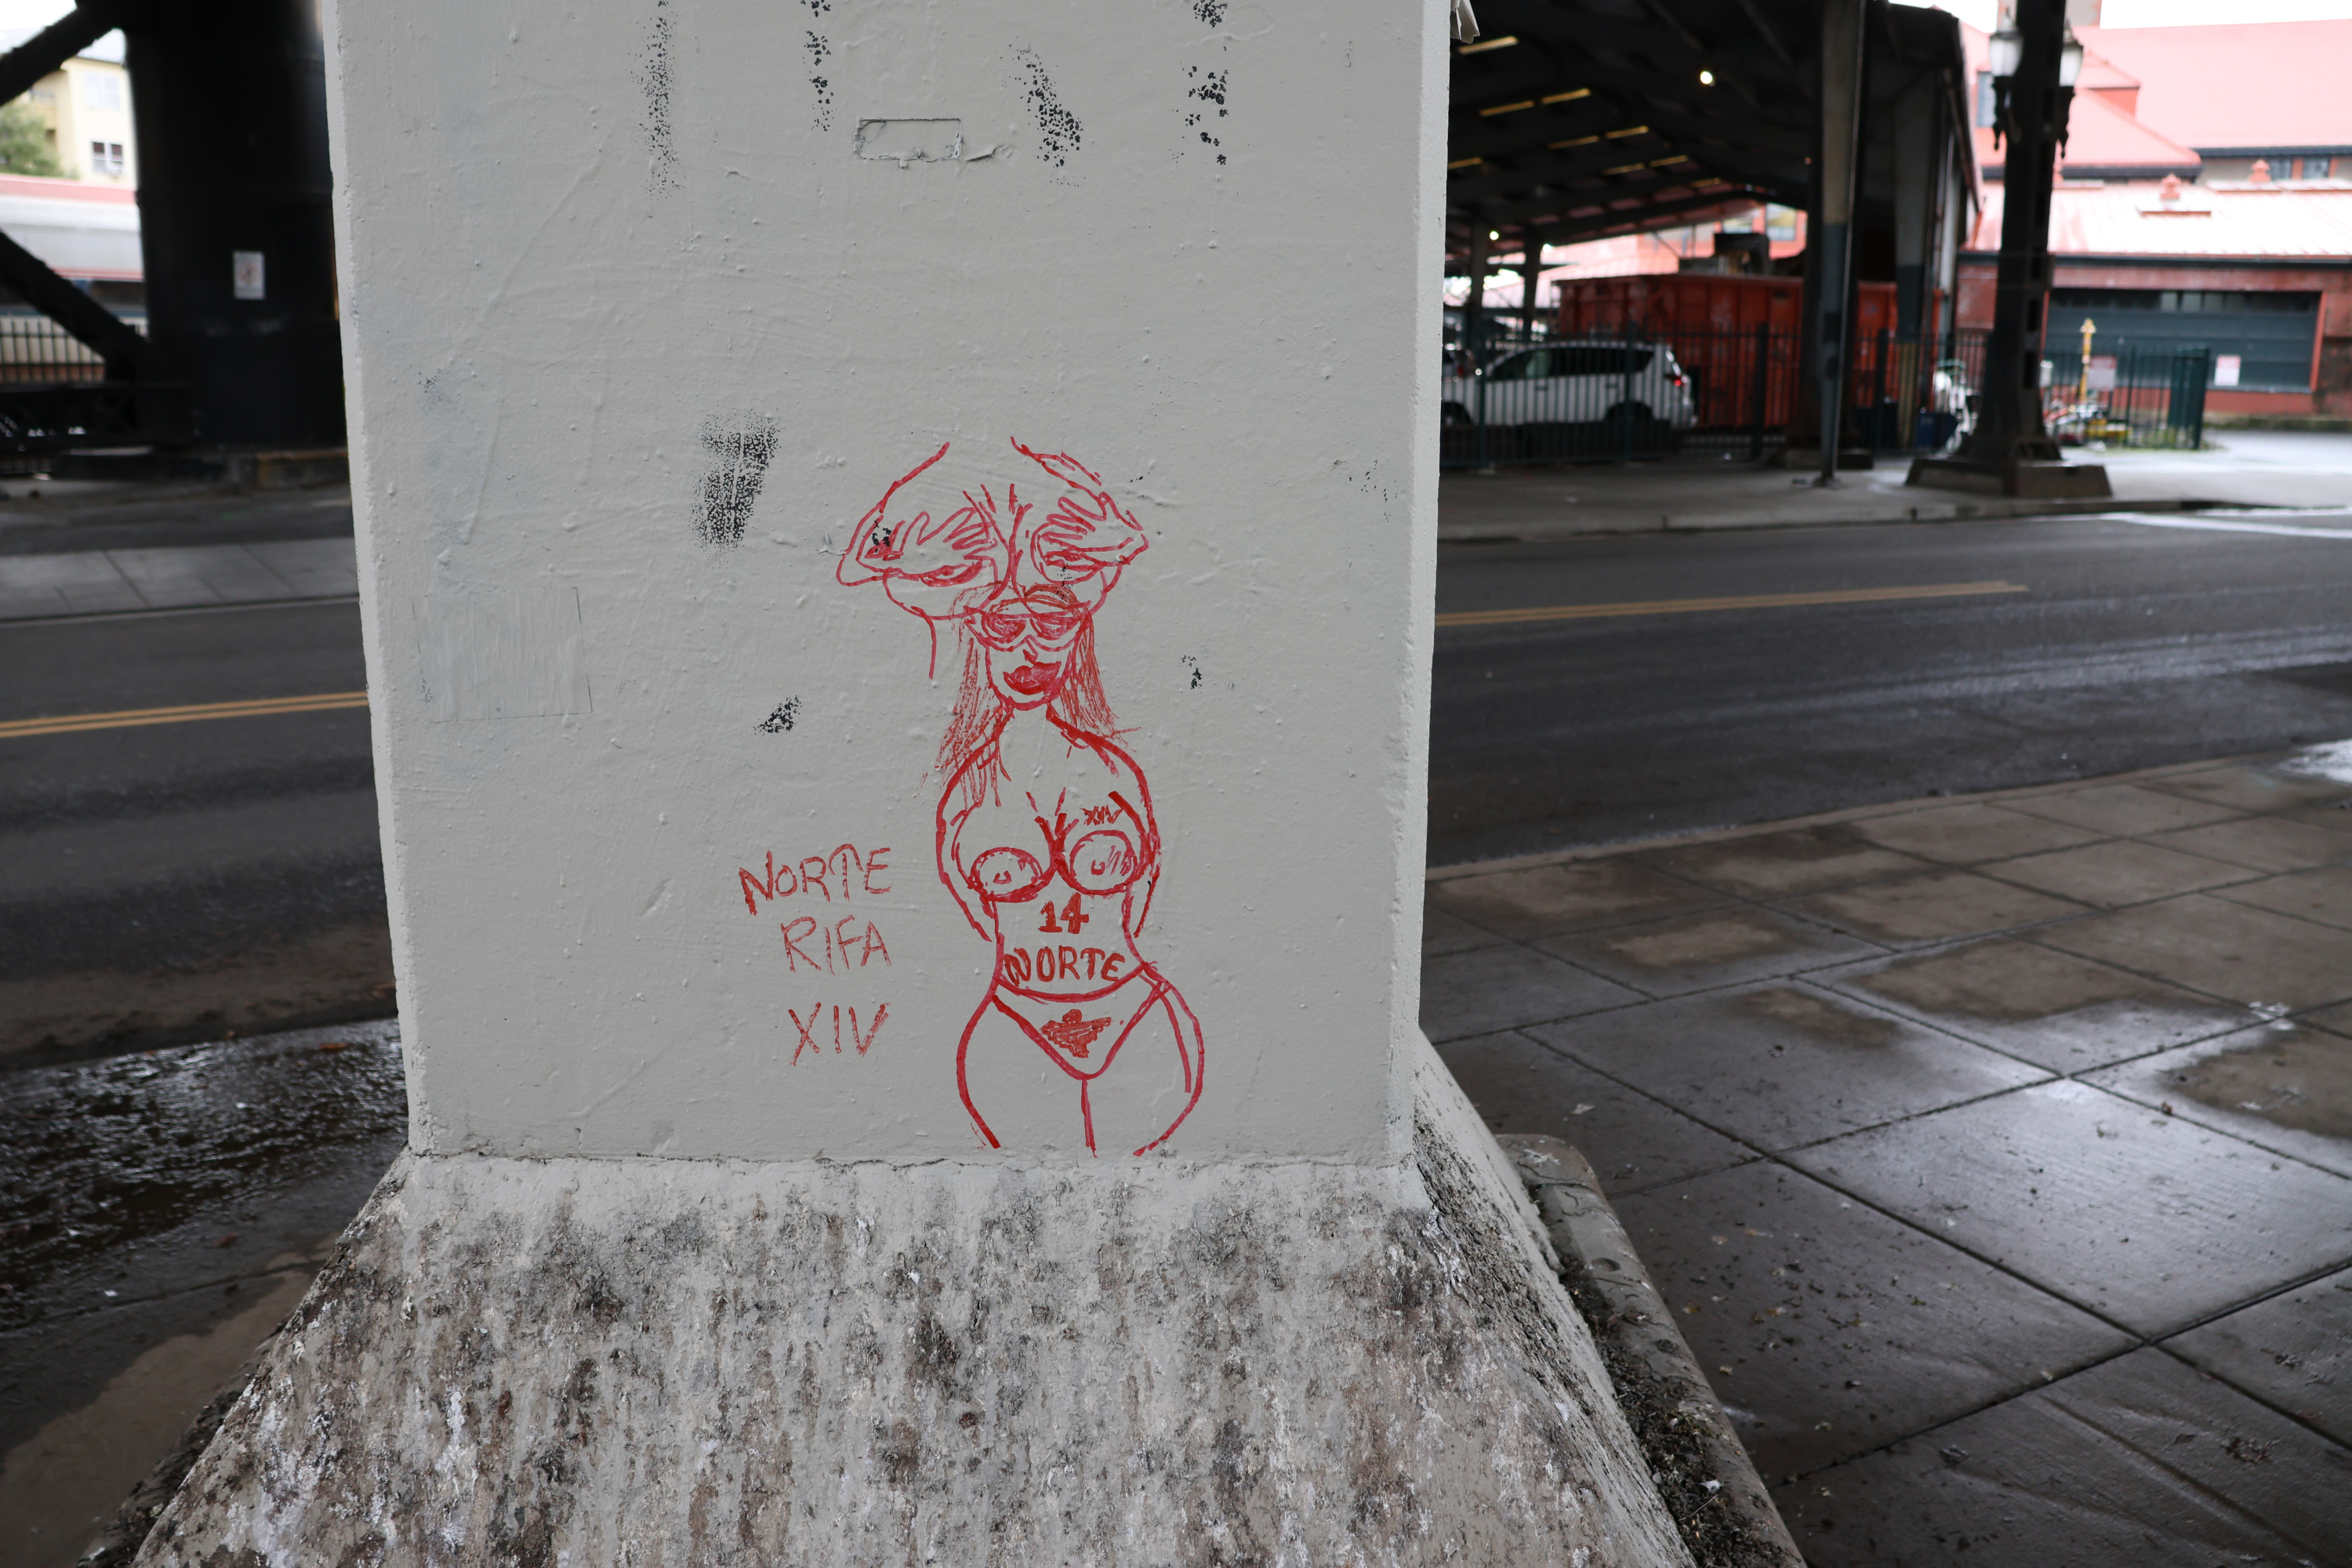 A cement column on which someone has crudely drawn two naked women. The first has nothing above the neck or below the waist. It's mostly just her breasts, and her hands clutching them. The second partially overlaps the first, and is more complete. It shows a woman with hands held behind her back, and nothing below her thighs is depicted. Her breasts are large, she's wearing panties, and has gang tattoos for Norte Rifa 14.